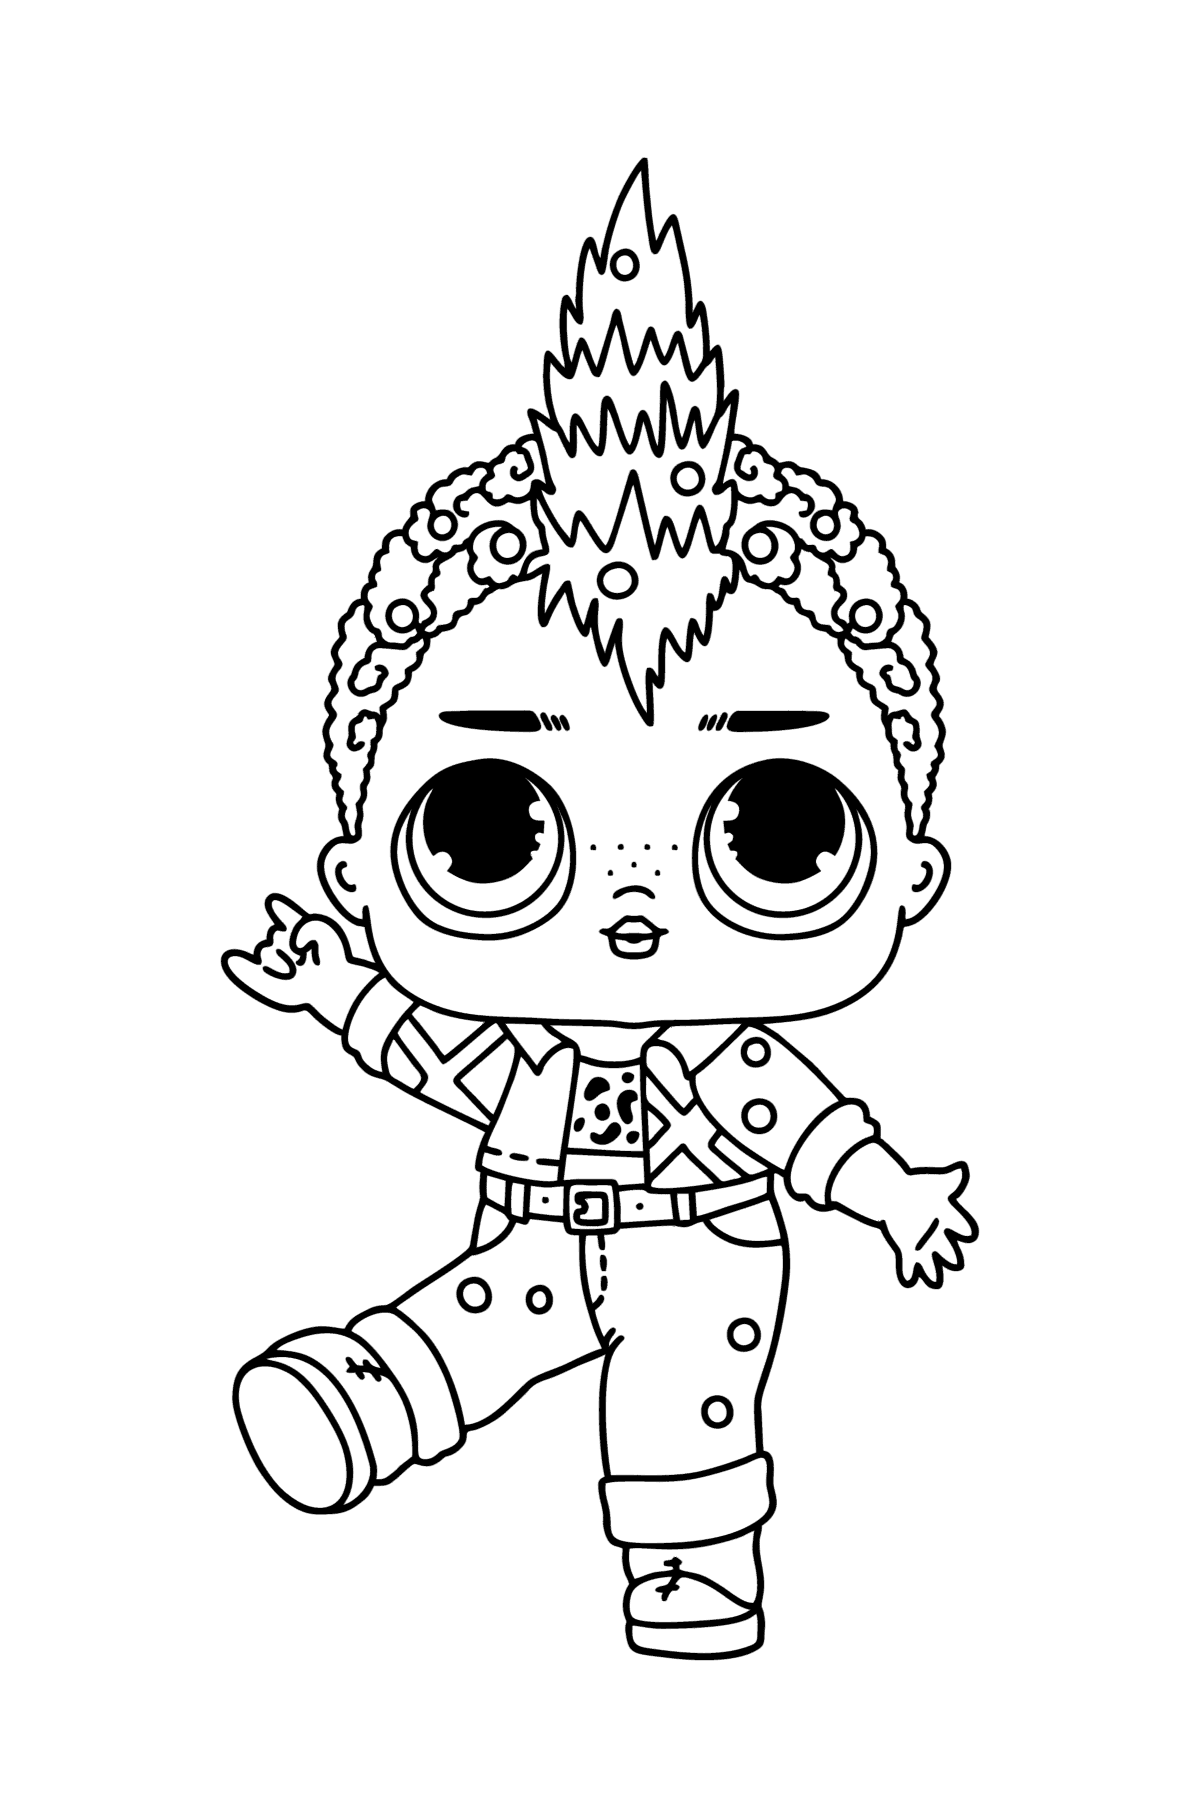 Colouring page LOL Surprise Punk Boi - Coloring Pages for Kids